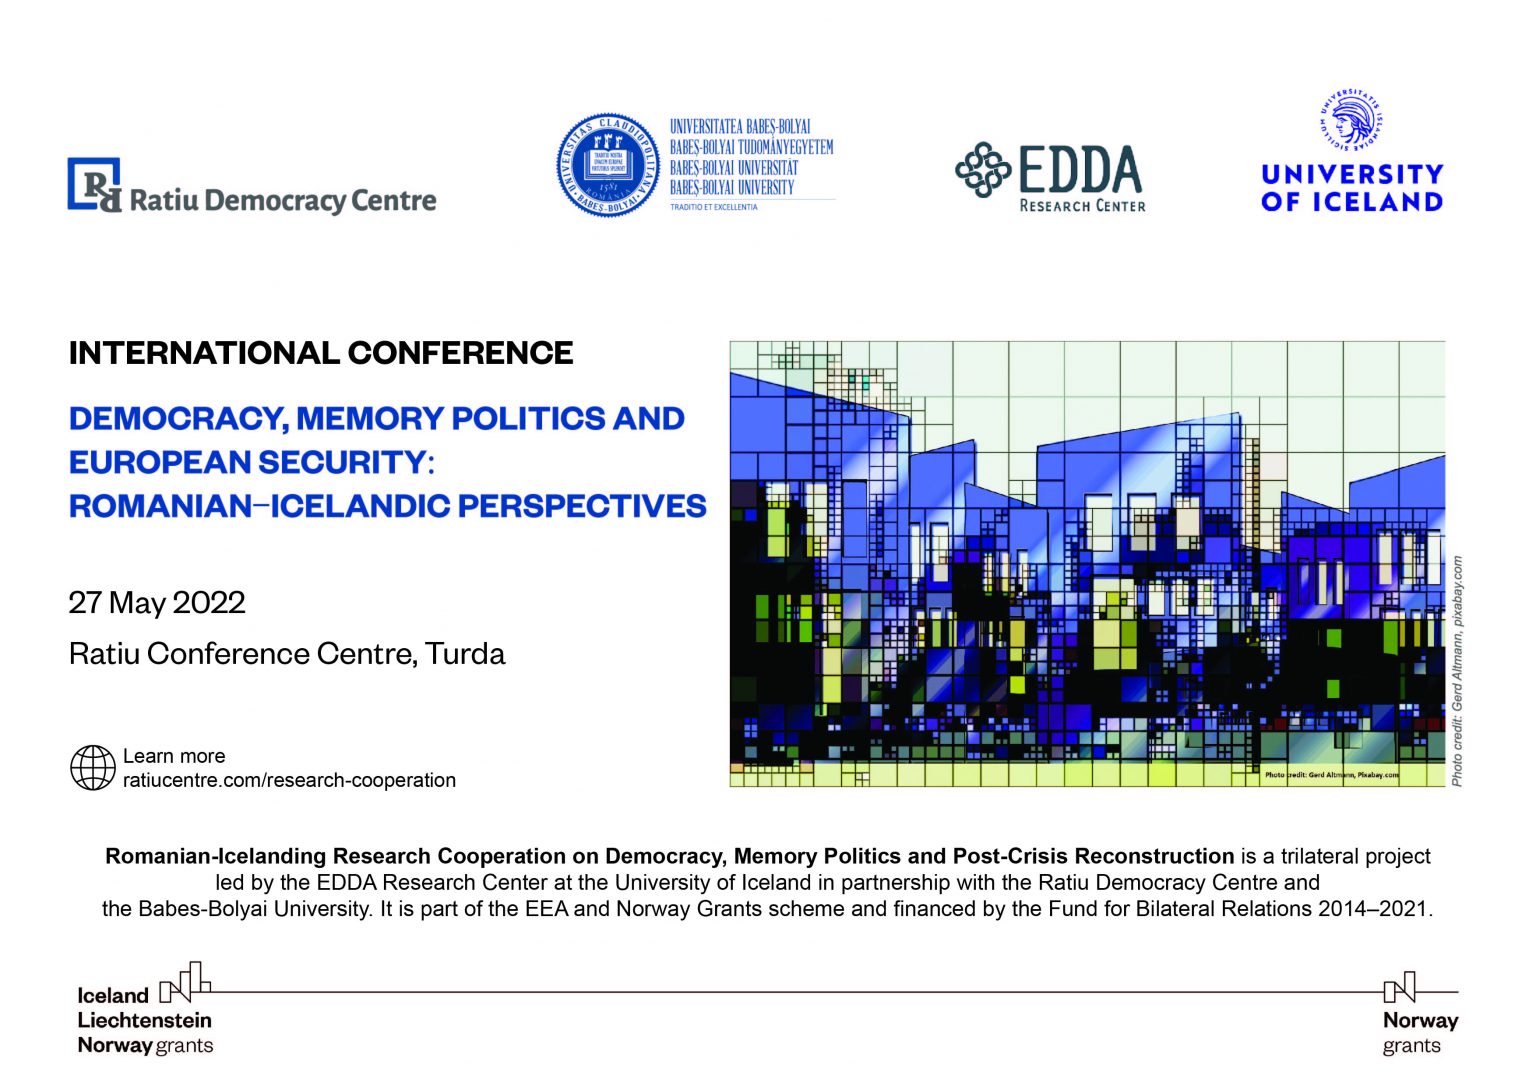 Liberal Democracy, Memory Politics and National Trajectories: Romanian-Icelandic Perspectives